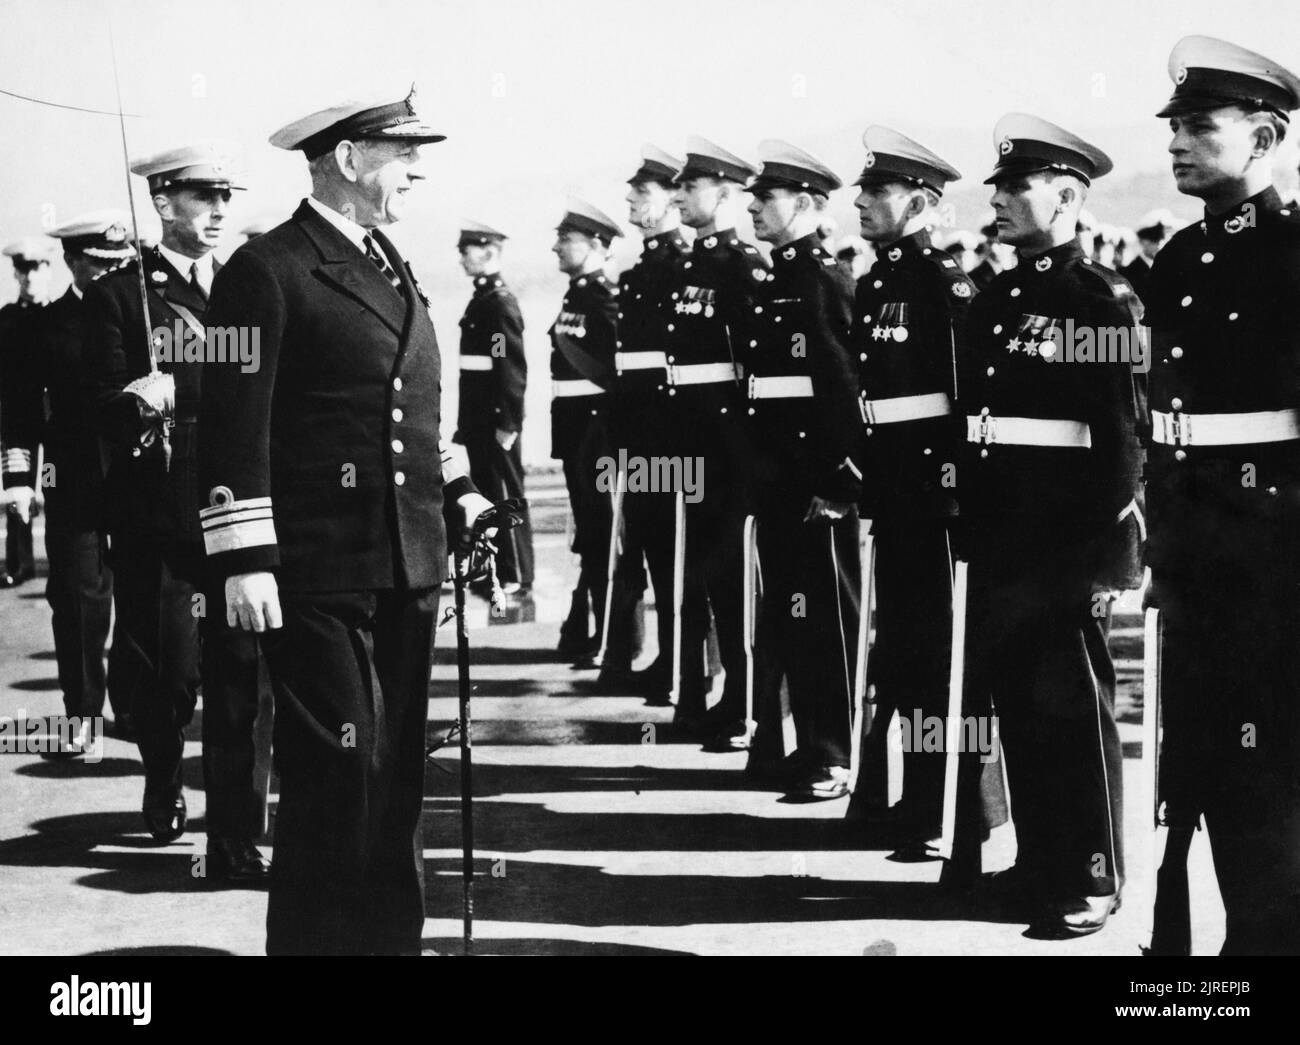 HMS Theseus Operating in Korea. 18 March 1951, on Board the Carrier at Sasebo, Japan. Vice Admiral W G Andrewes, KBE, CB, DSO, Commander of the British Commonwealth and Allied Fleet in Korean Waters, also responsible for the naval blockade of Korea, inspects the Marine Guard on board HMS THESEUS. He is accompanied by Captain R S L Muldowney, RM, who commands the Marine detachment in THESEUS, and the Commanding Officer Captain A S Bolt, DSC, RN. The Marines are, left to right: Bugler J Noyes, Windsor, Berks; Sgt J Money, Deal, Kent; Marine G A Reckless, Rochdale, Lancs; Cpl A R Mead, Budliegh, Stock Photo